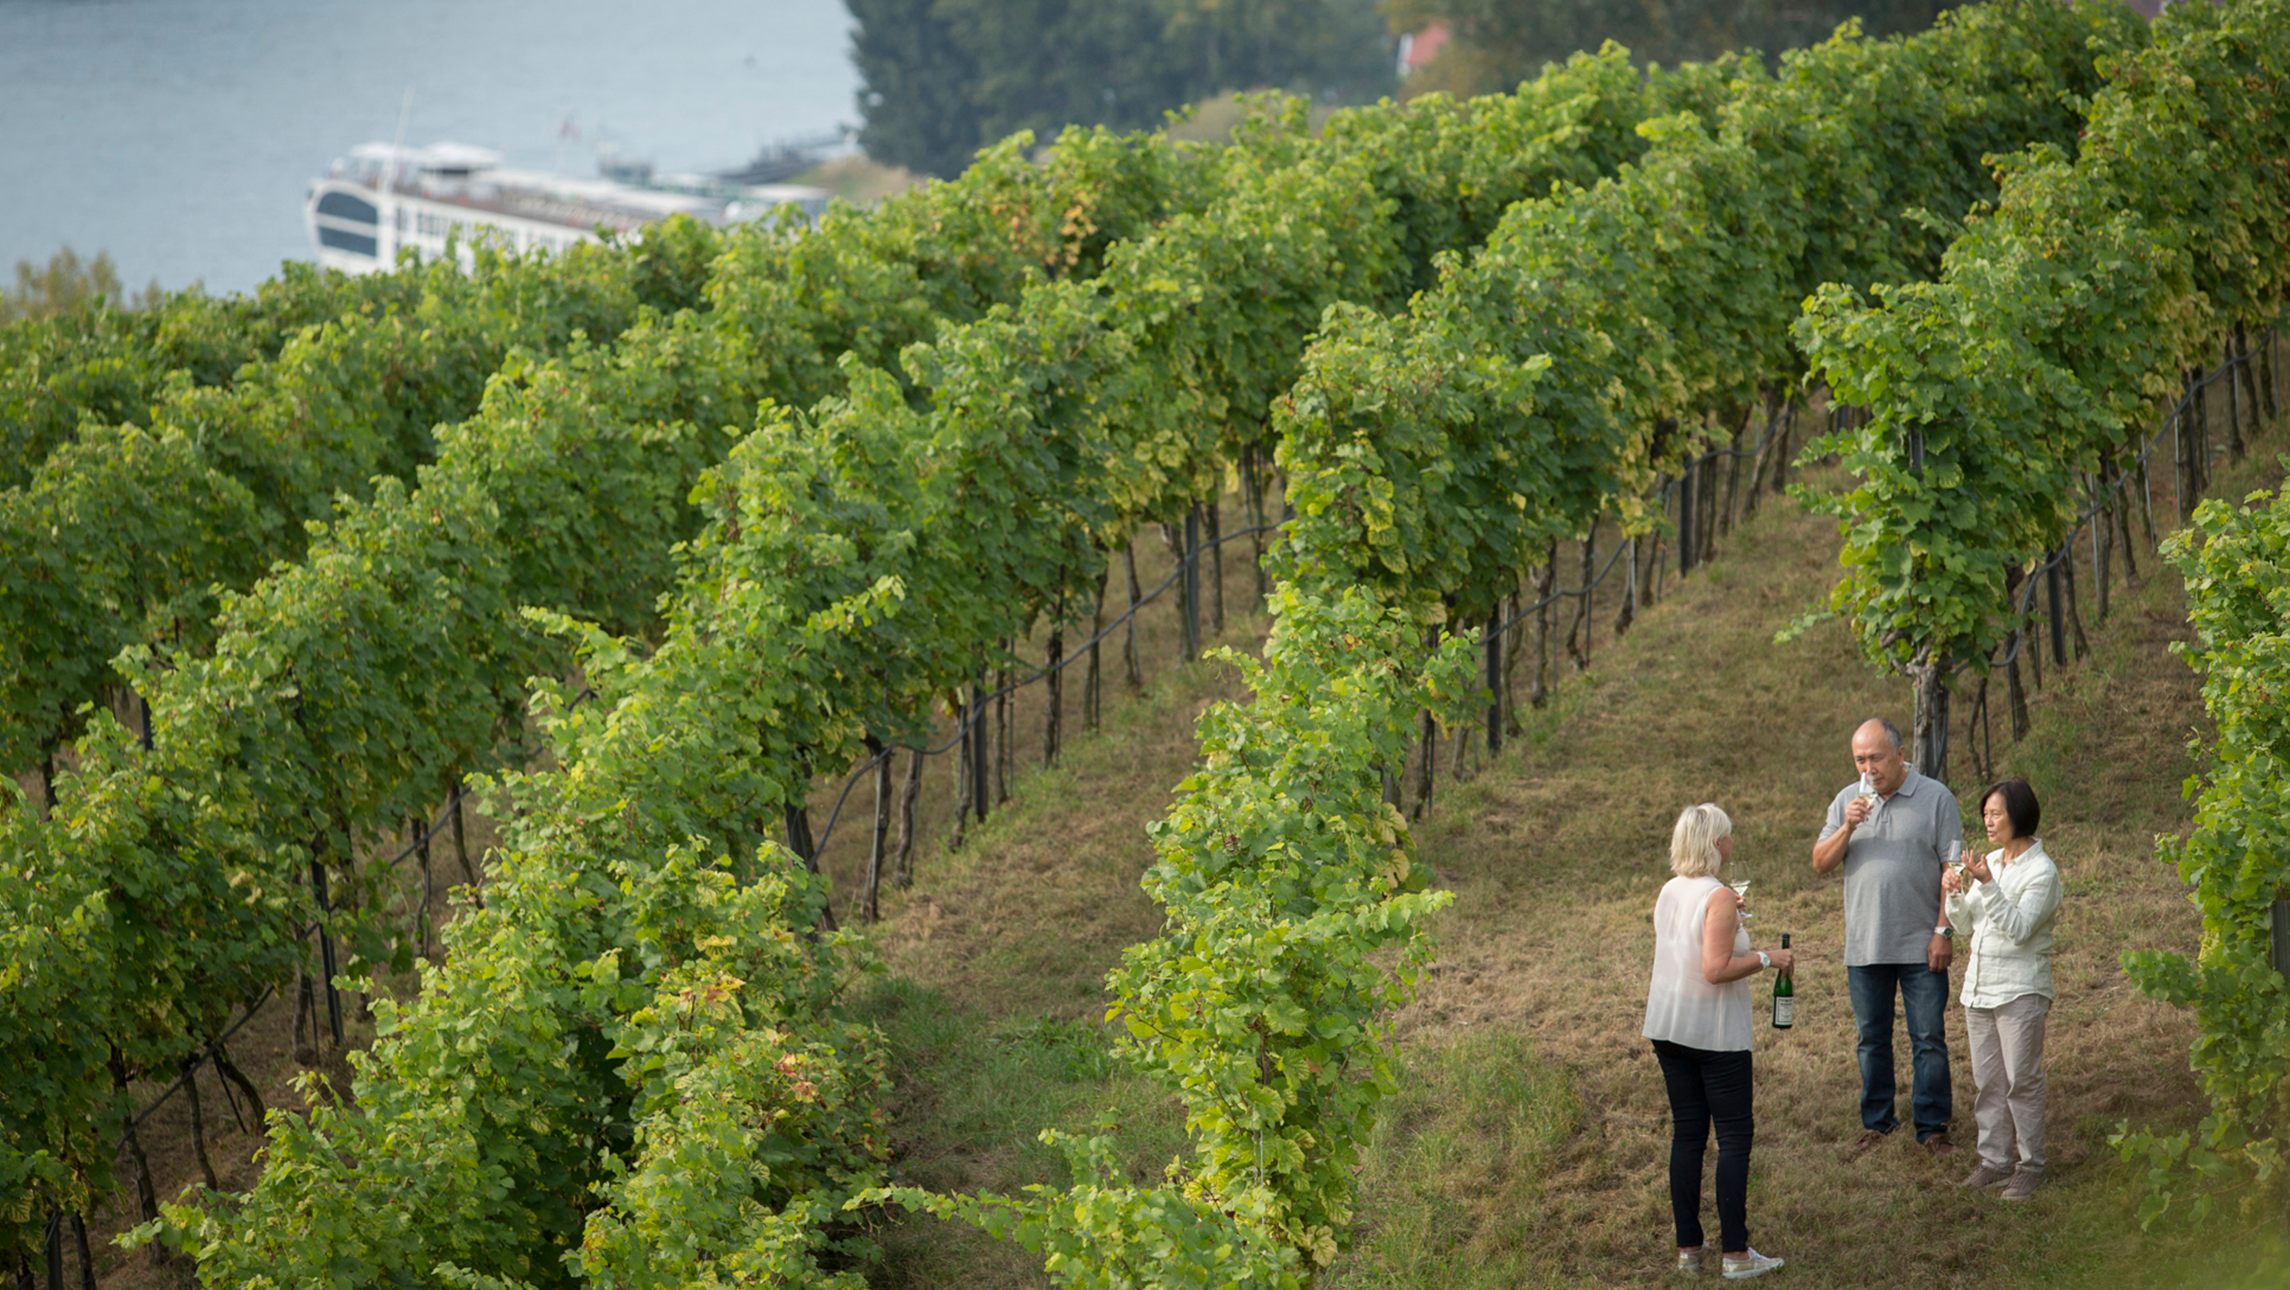 A couple enjoying a vineyard tour in Germany